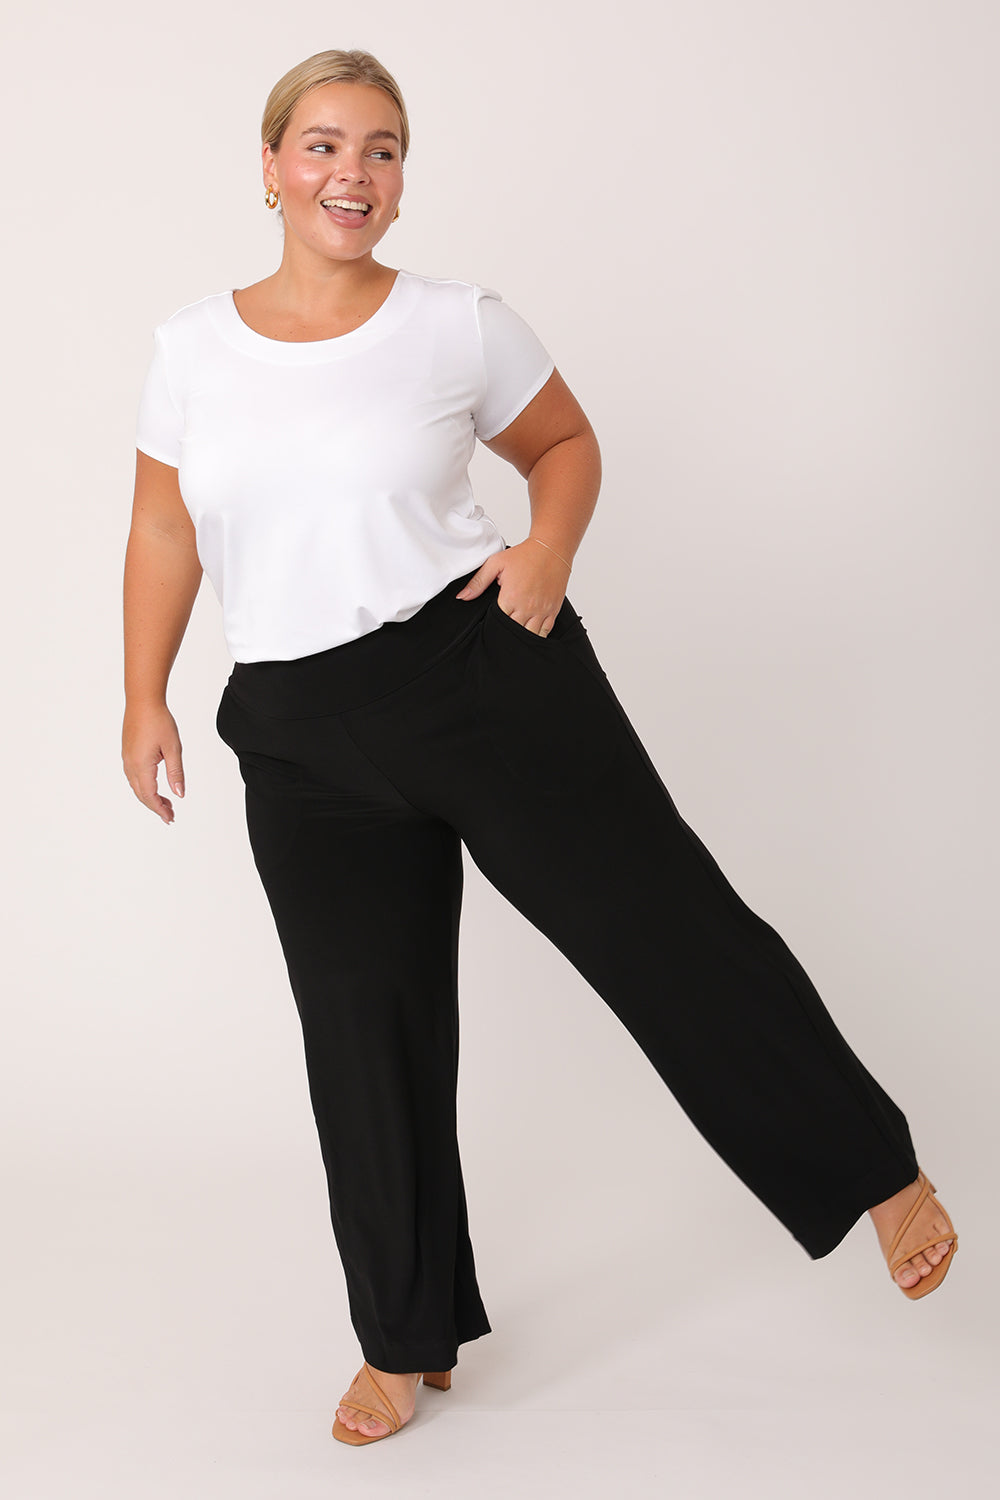 A curvy petite height woman wears black work pants in petite length with a white bamboo jersey T-shirt top. Great pants for short women, these black jersey pull-on trousers are available in sizes 8 to 24, petite to plus sizes.